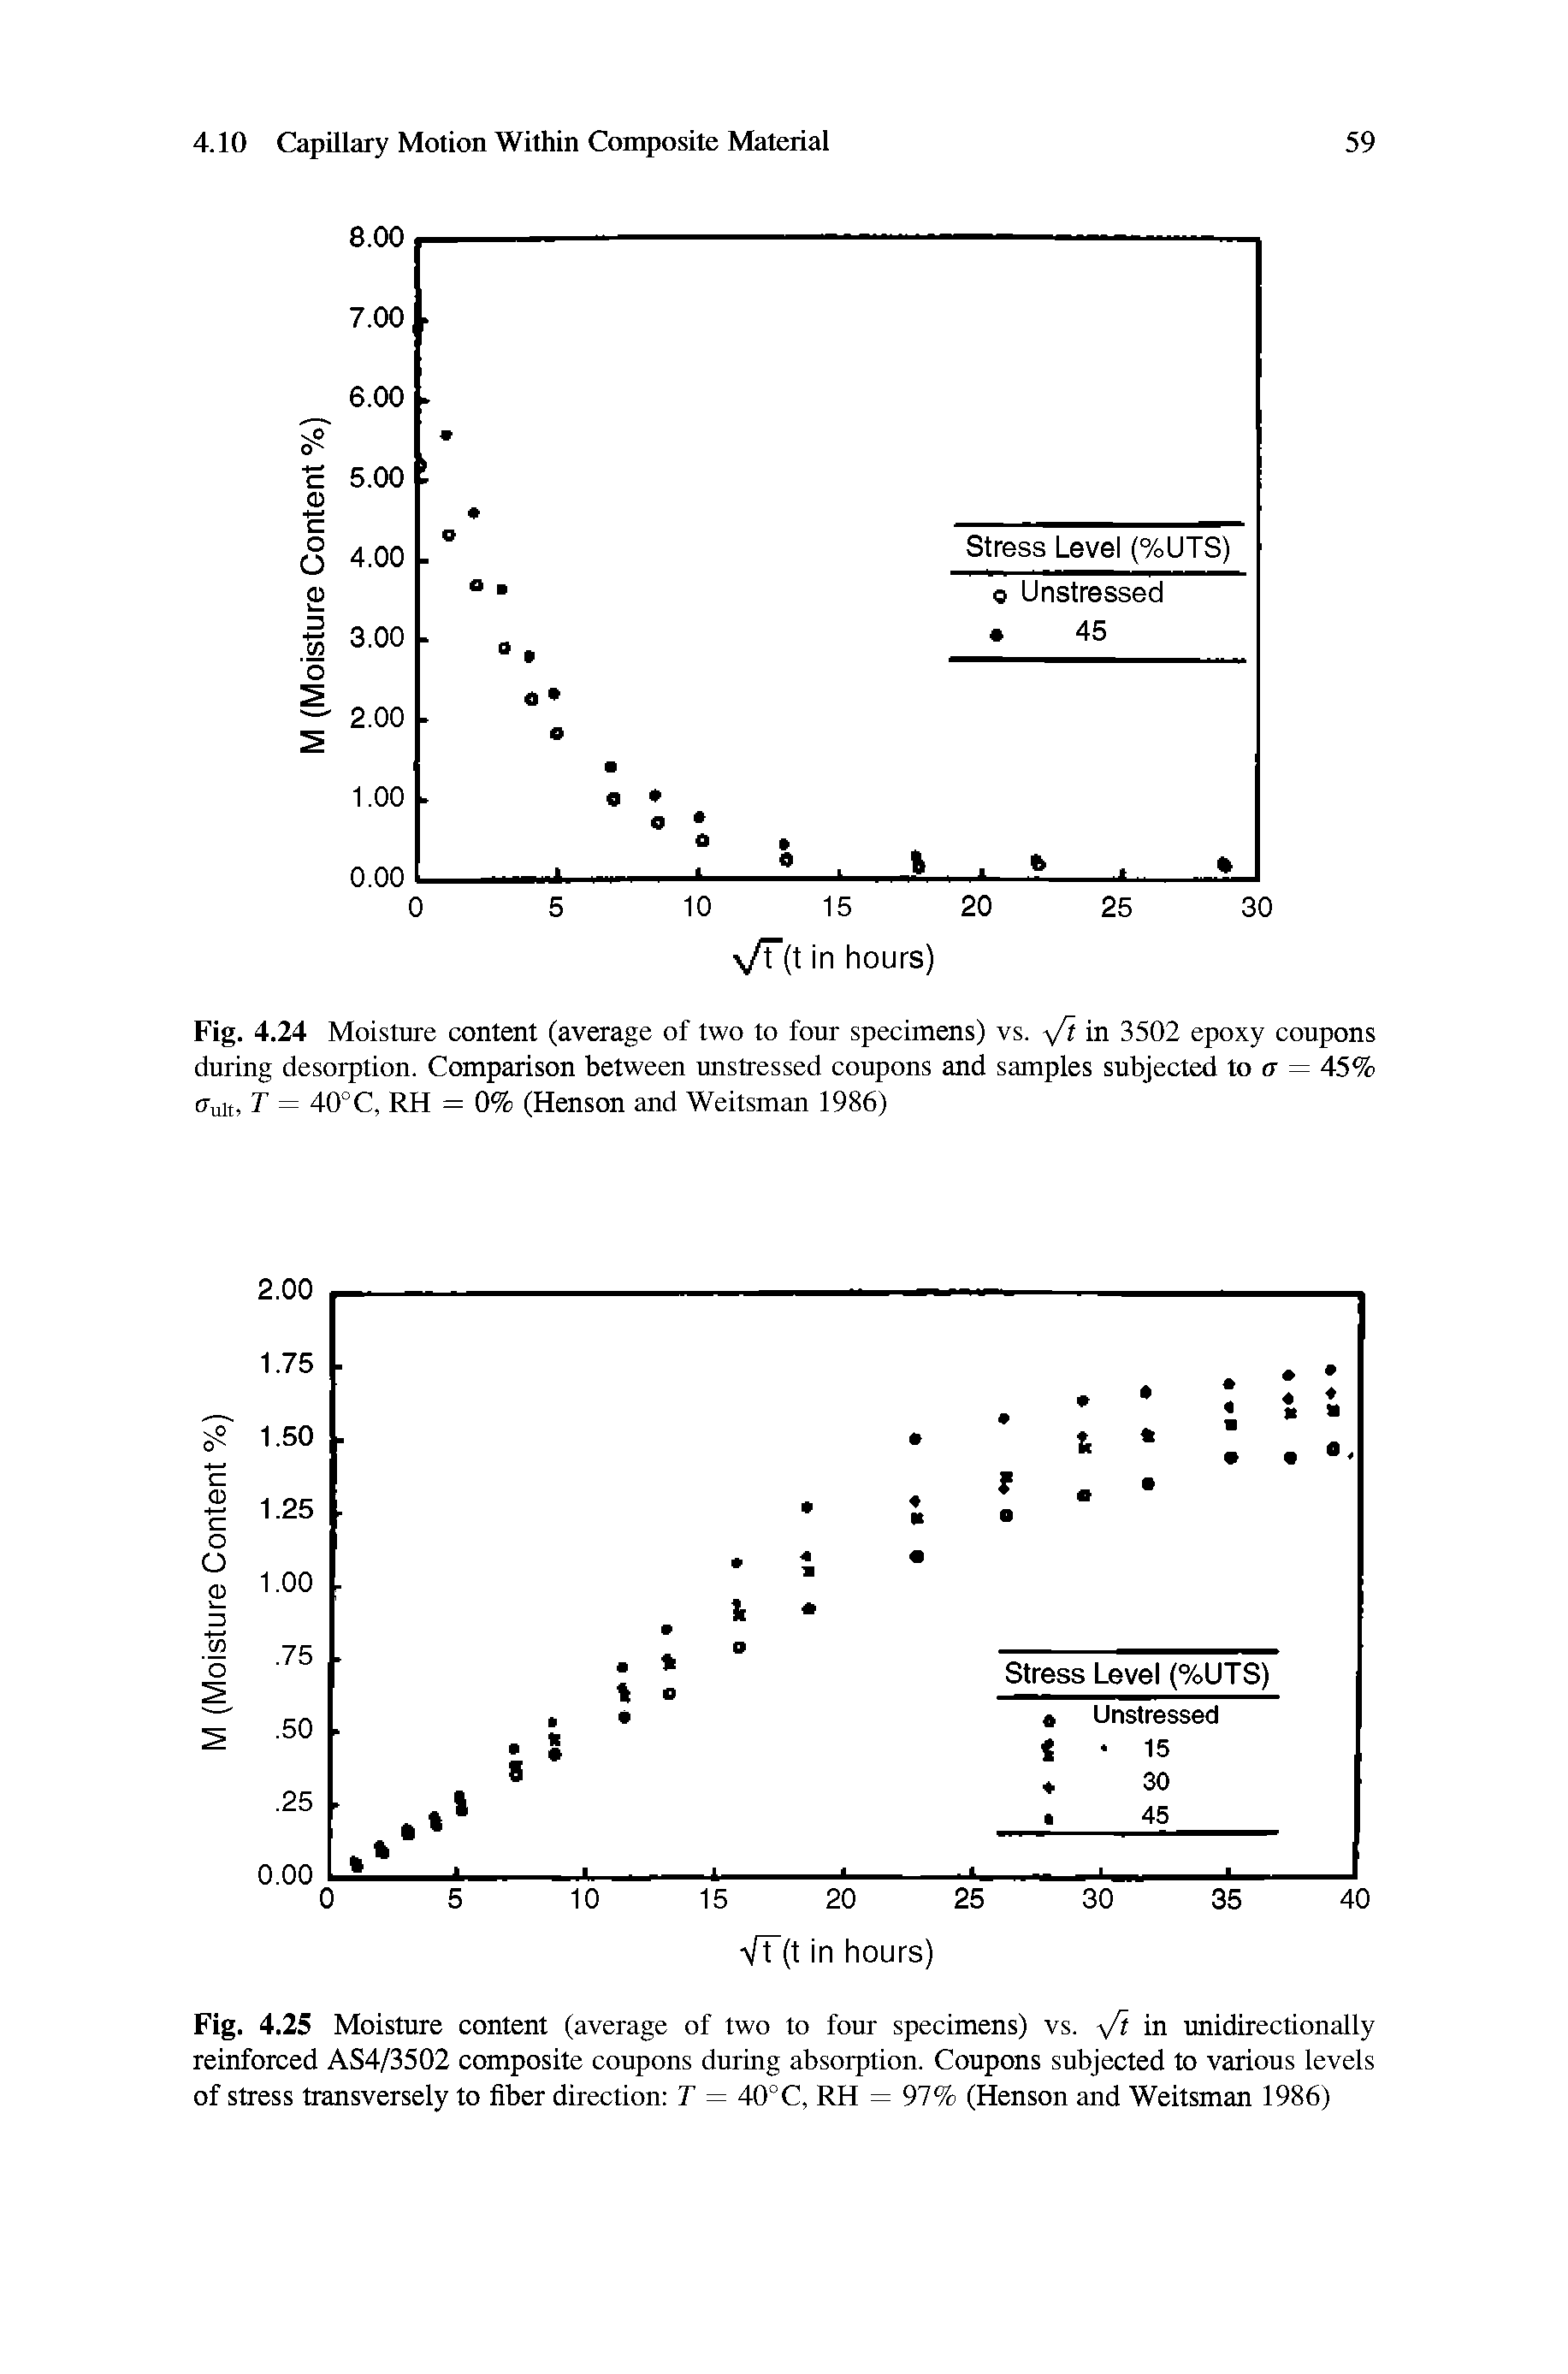 Fig. 4.25 Moisture content (average of two to four specimens) vs. i/i in unidirectionally reinforced AS4/3502 composite coupons during absorption. Coupons subjected to various levels of stress transversely to fiber direction T = 40°C, RH = 97% (Henson and Weitsman 1986)...